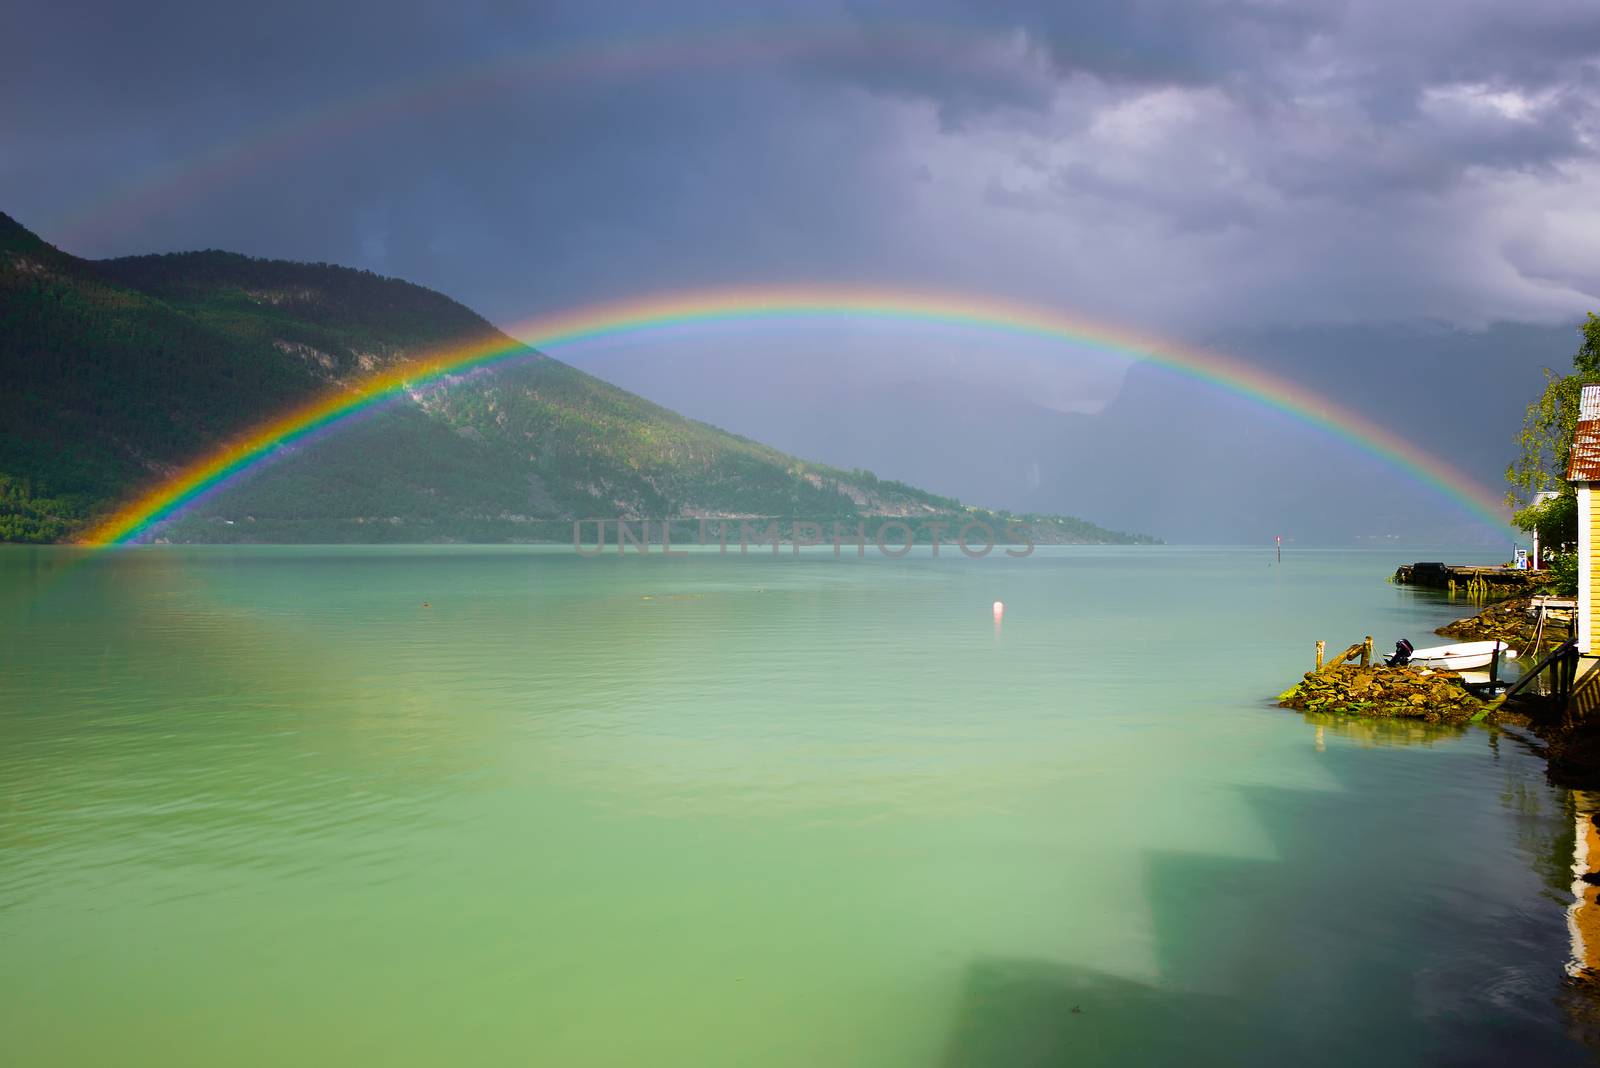 Full, double rainbow over the Lustrafjord, an arm of the Sognefjord in Sogn og Fjordane, Norway.